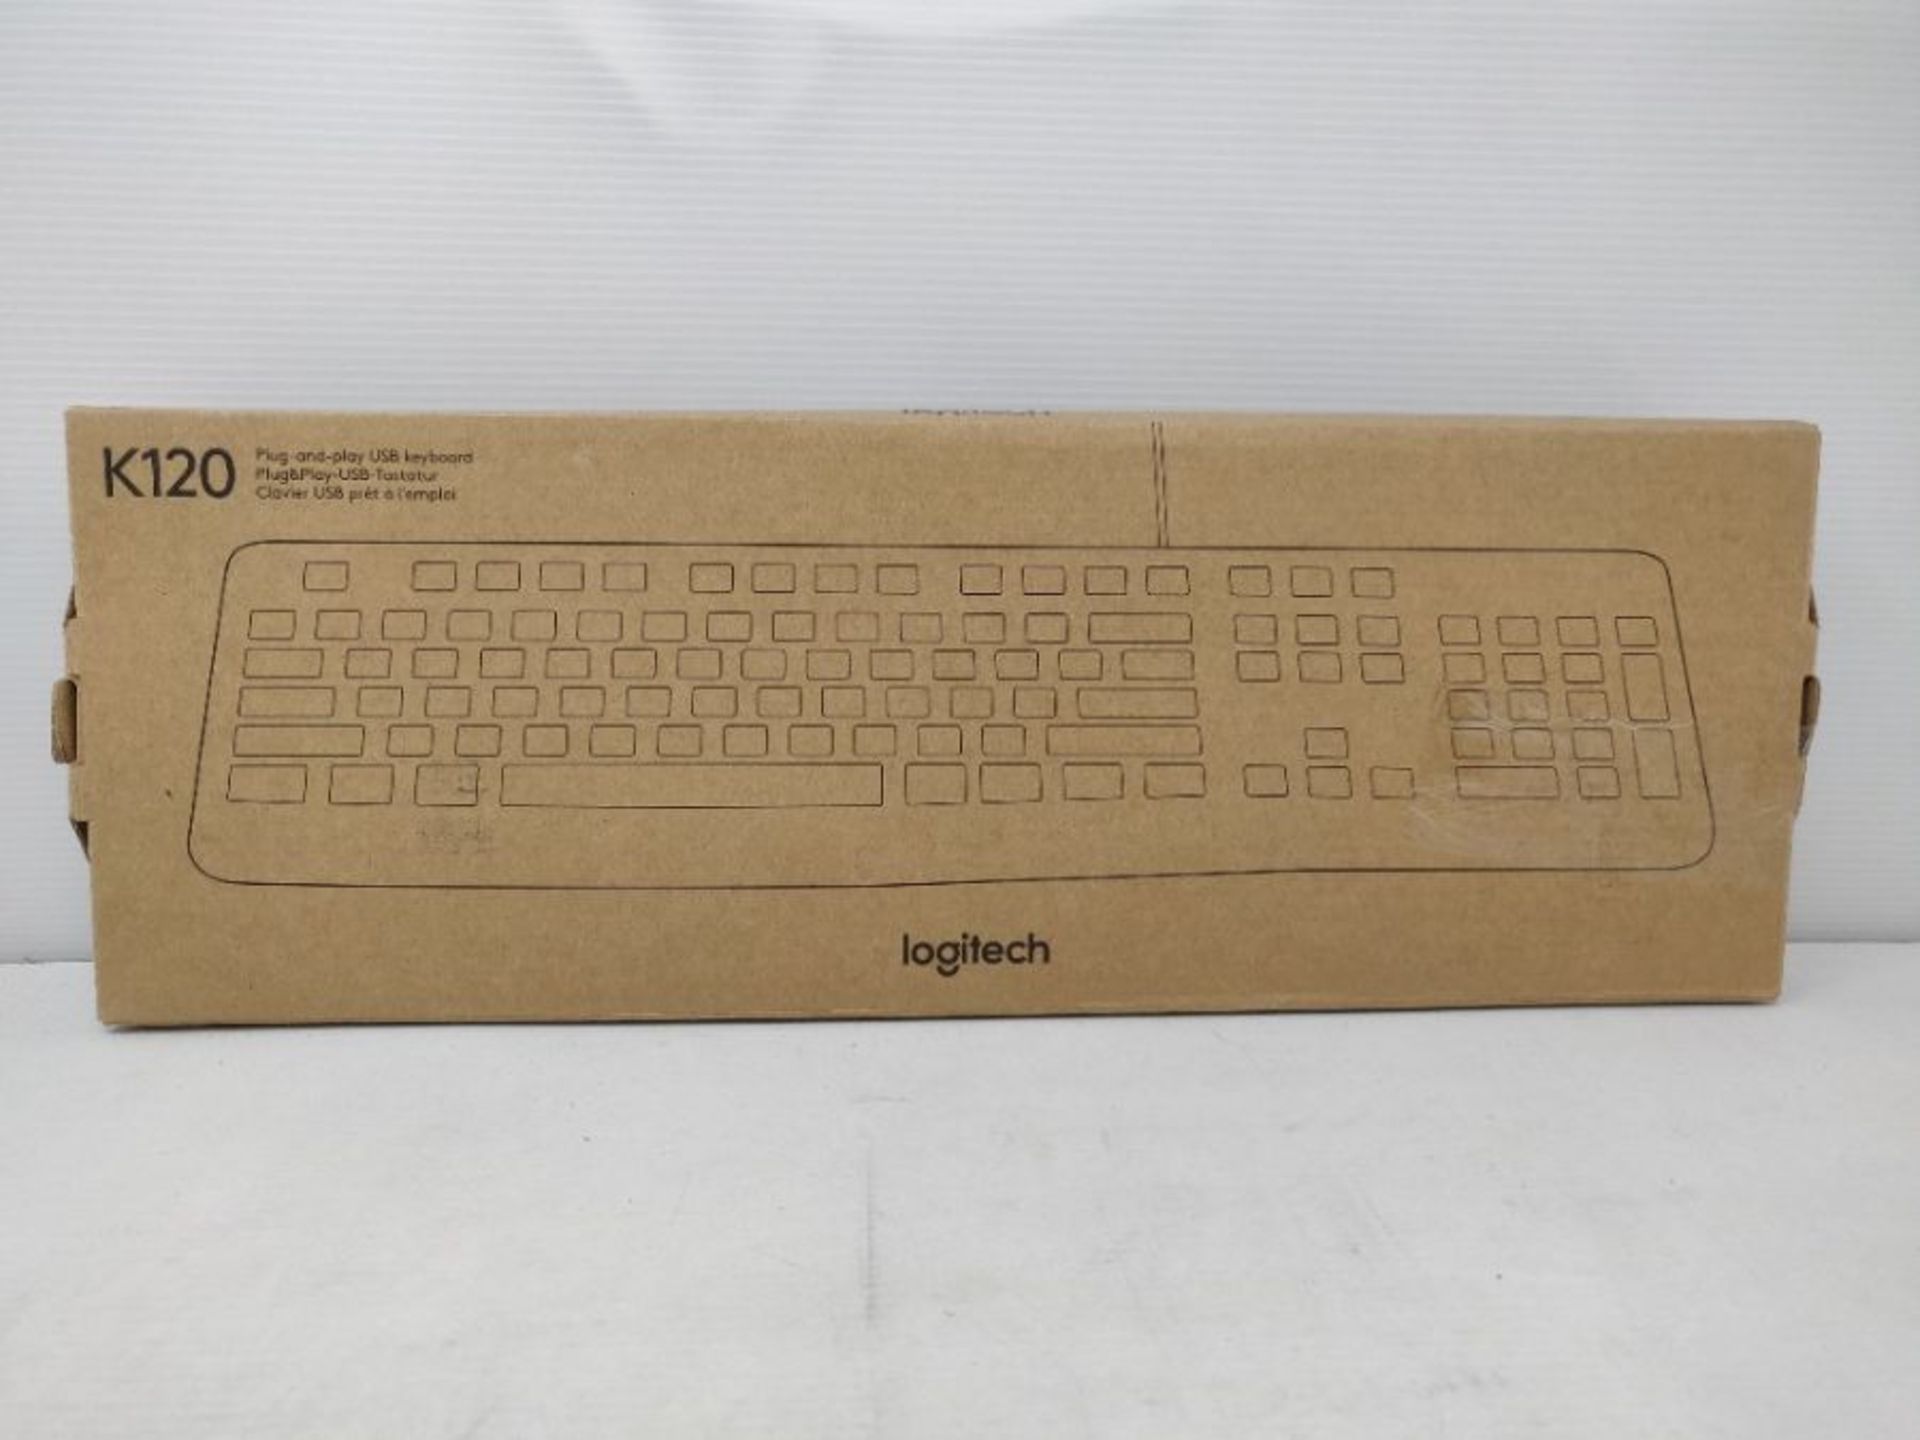 Logitech K120 Wired Business Keyboard for Windows or Linux, USB Plug-and-Play, Full-Si - Image 2 of 3